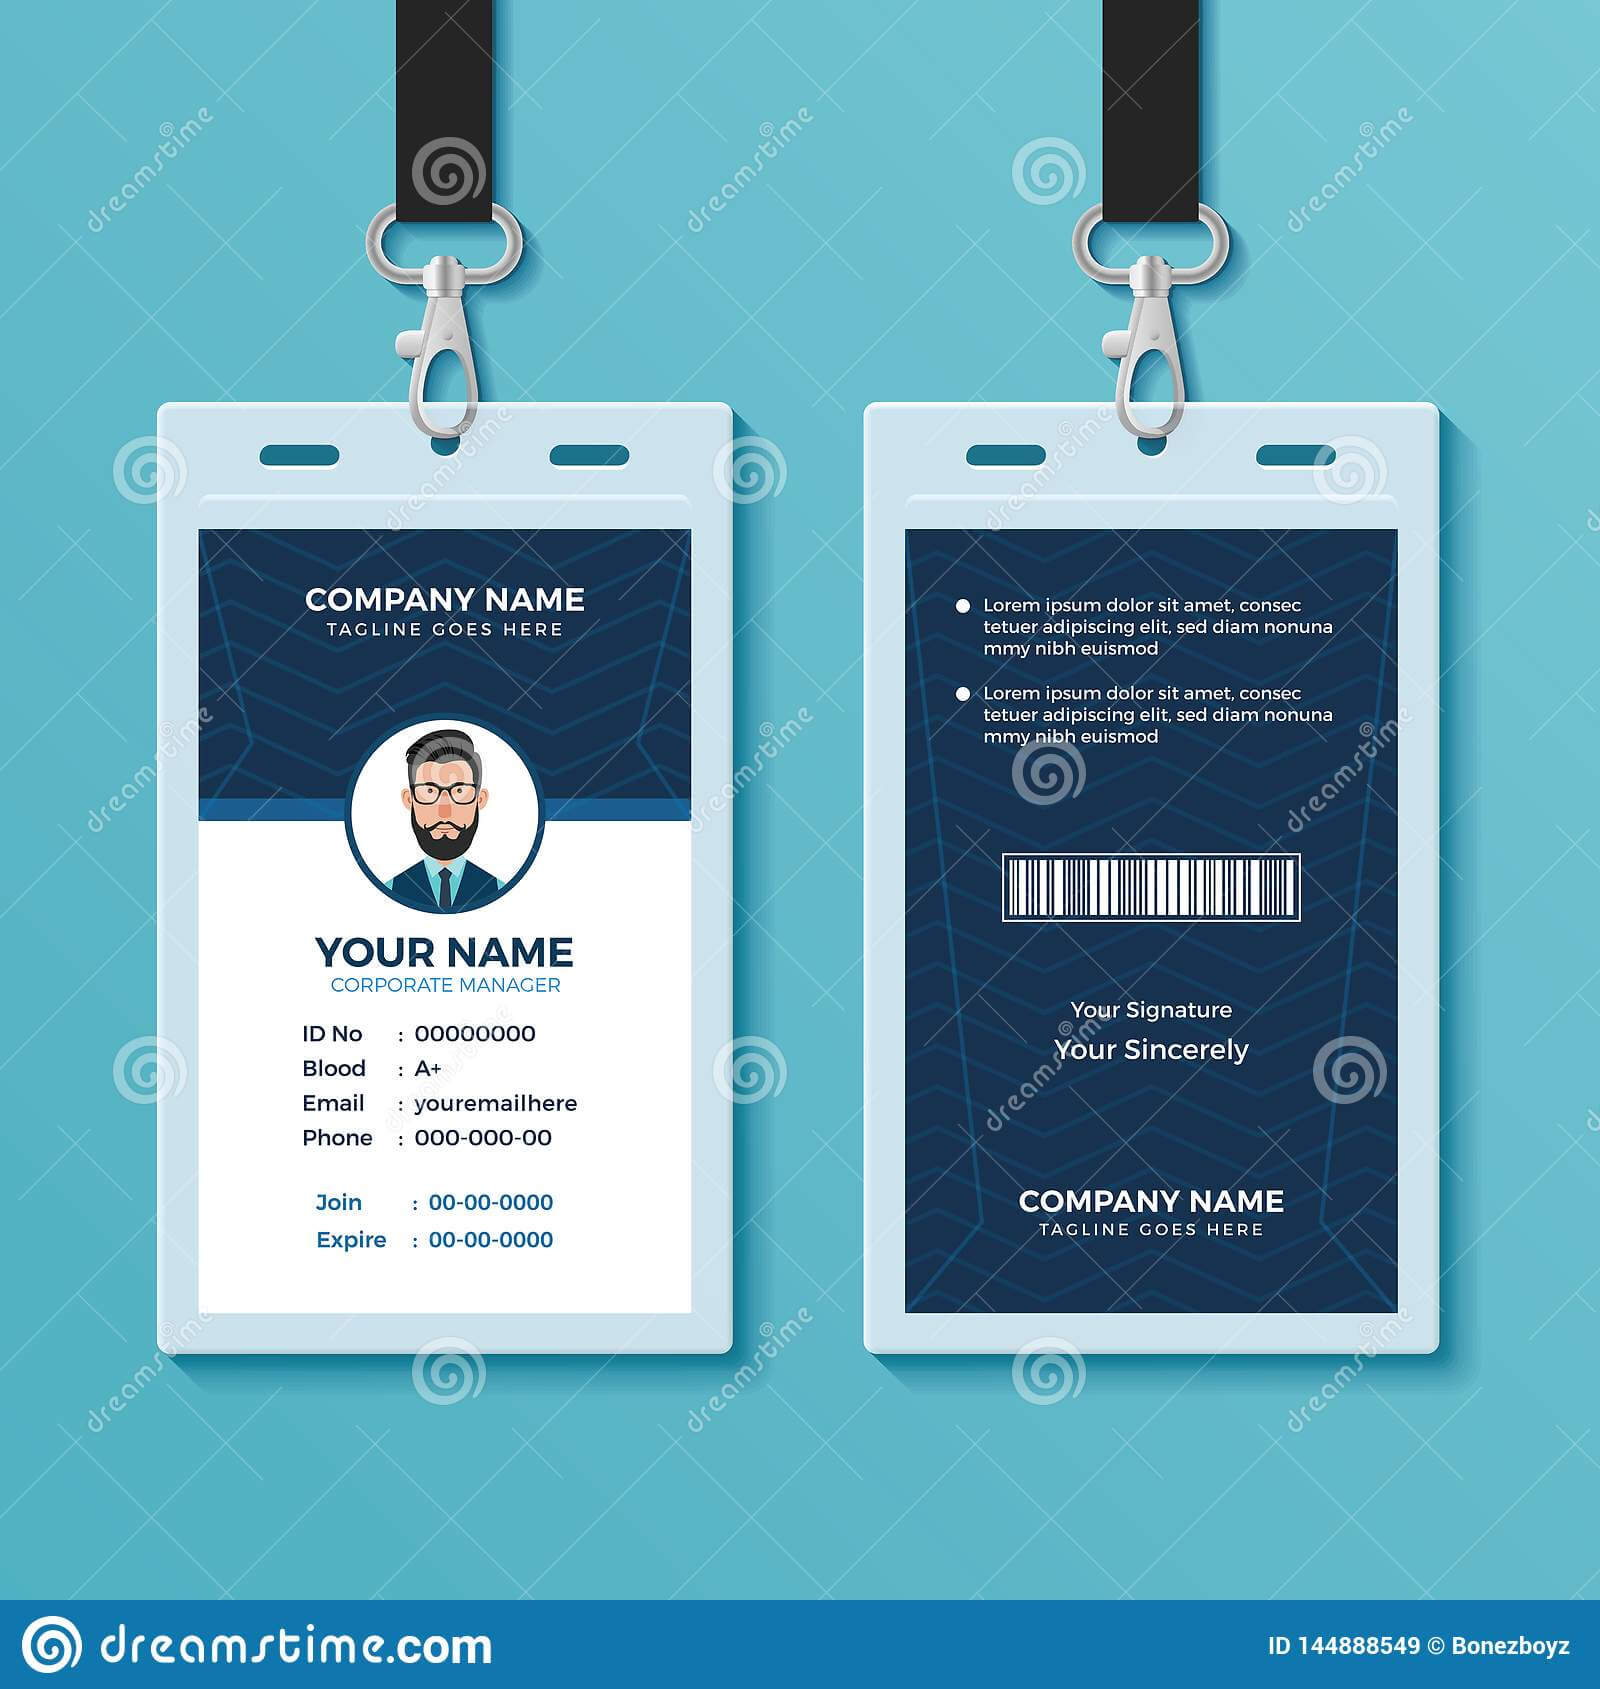 Modern And Clean Id Card Design Template Stock Vector Regarding Conference Id Card Template